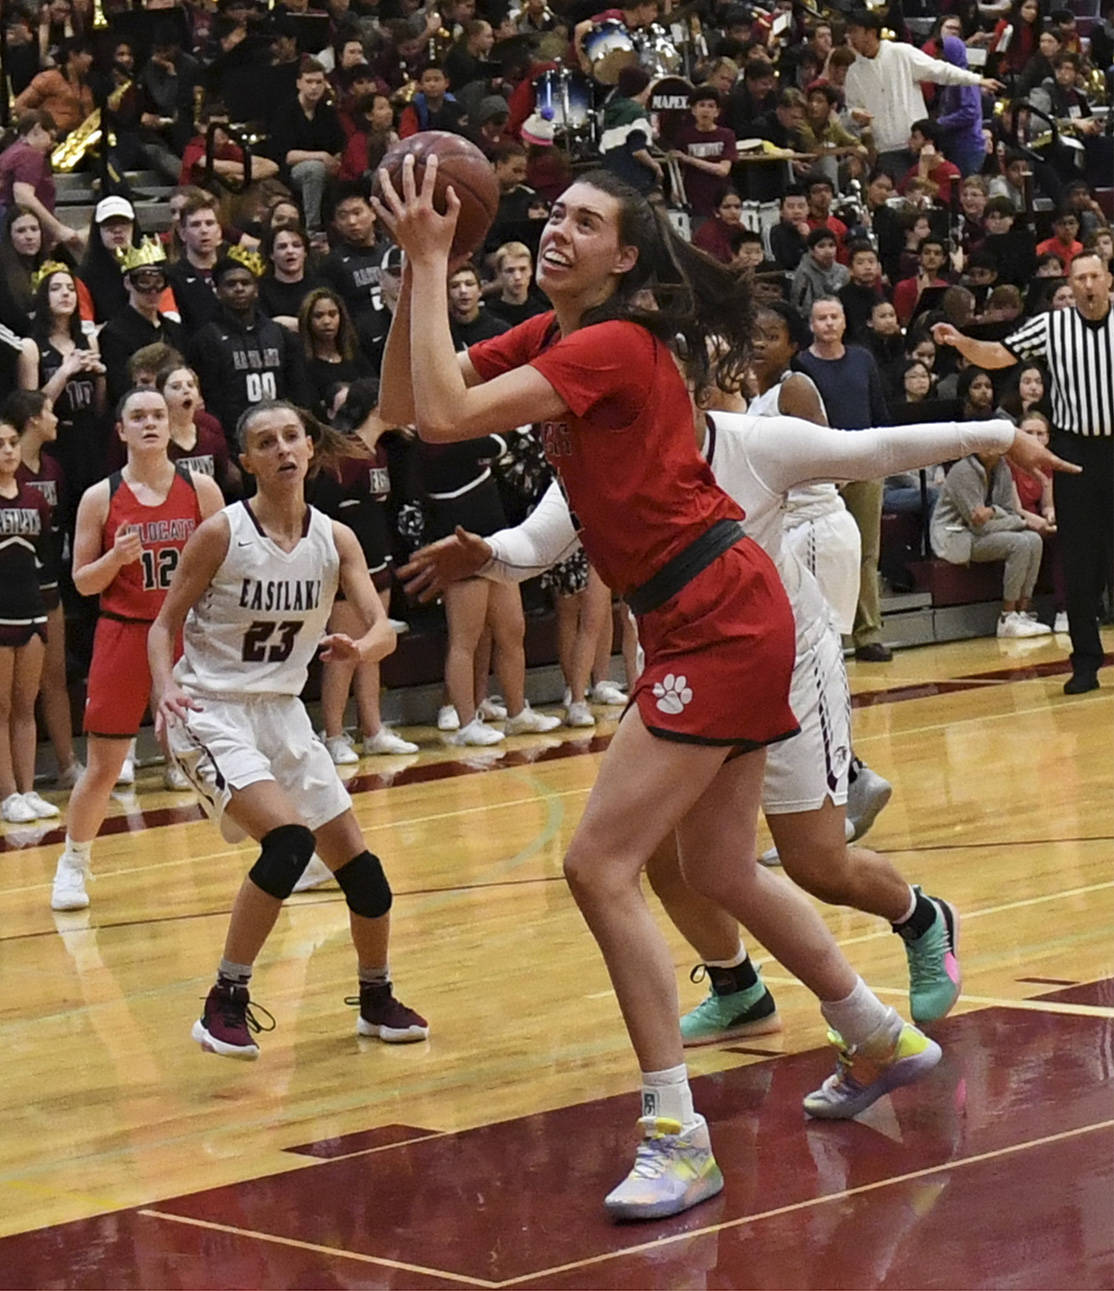 Mount Si forward Sela Heide attempts a layup during the Wildcats’ 36-30 win over the Eastlake Wolves on Jan. 17. The win put the Wildcats in second place in the KingCo Crest with a 5-3 league record. Photo courtesy of Calder Productions